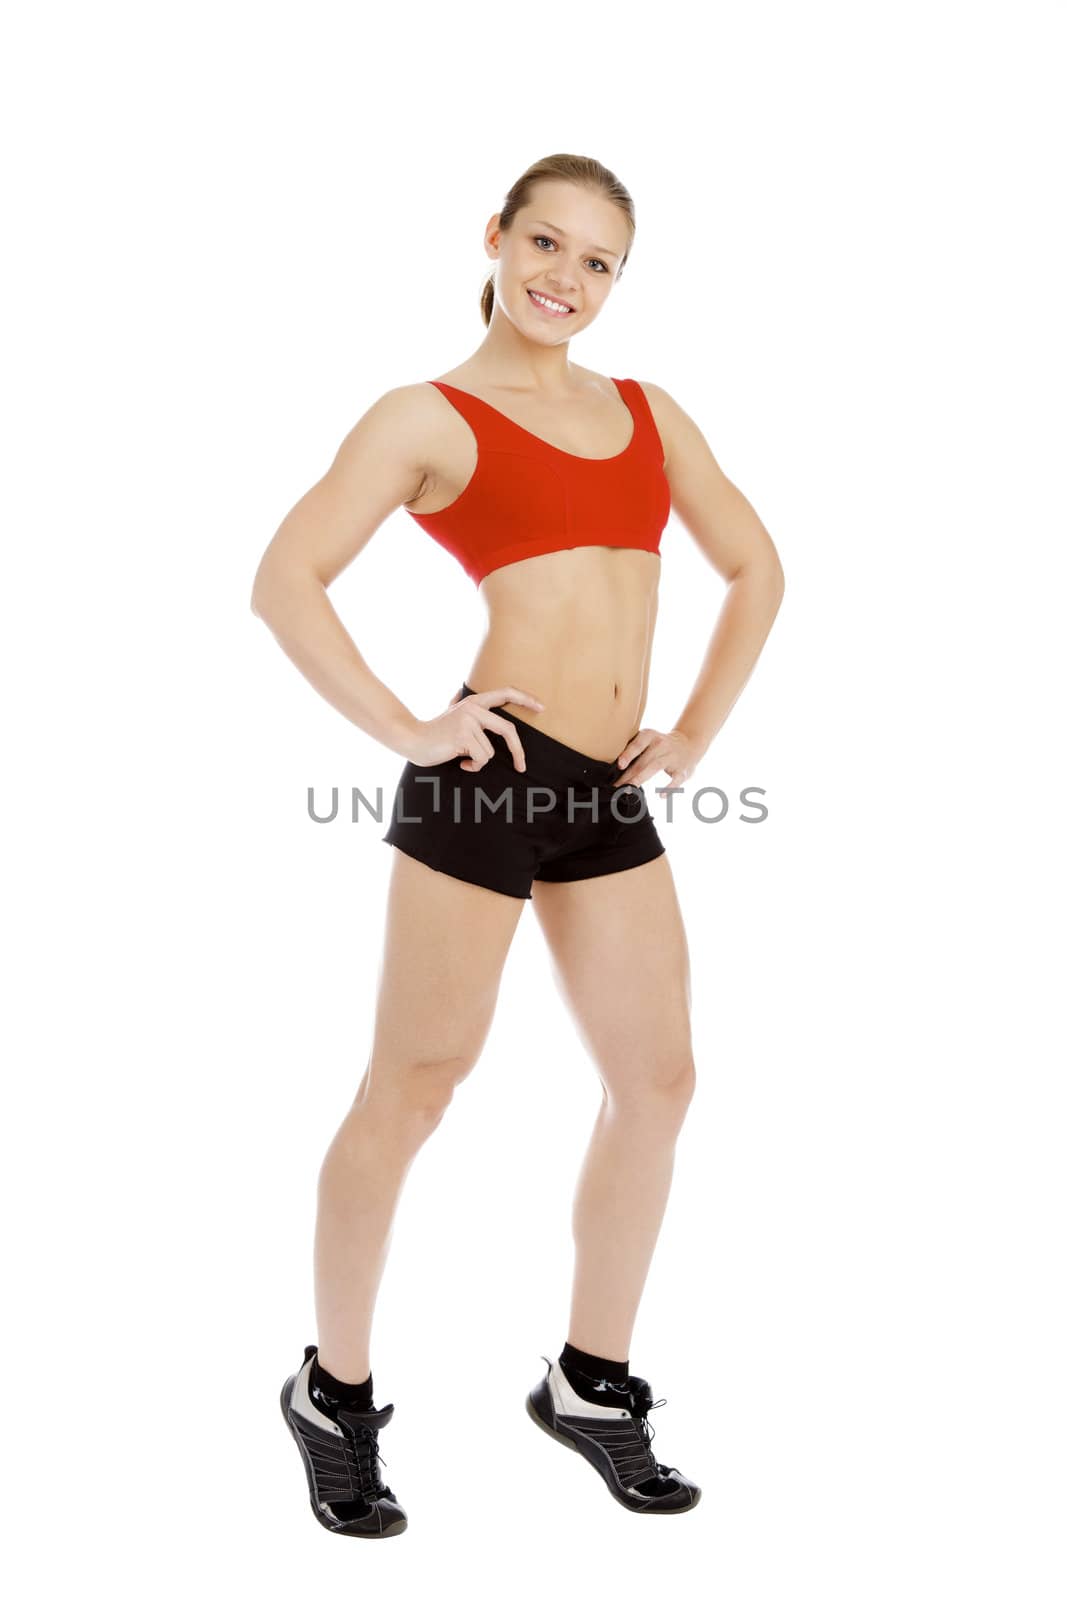 Smiling young sporty muscular woman. Isolated over white backgro by Nobilior